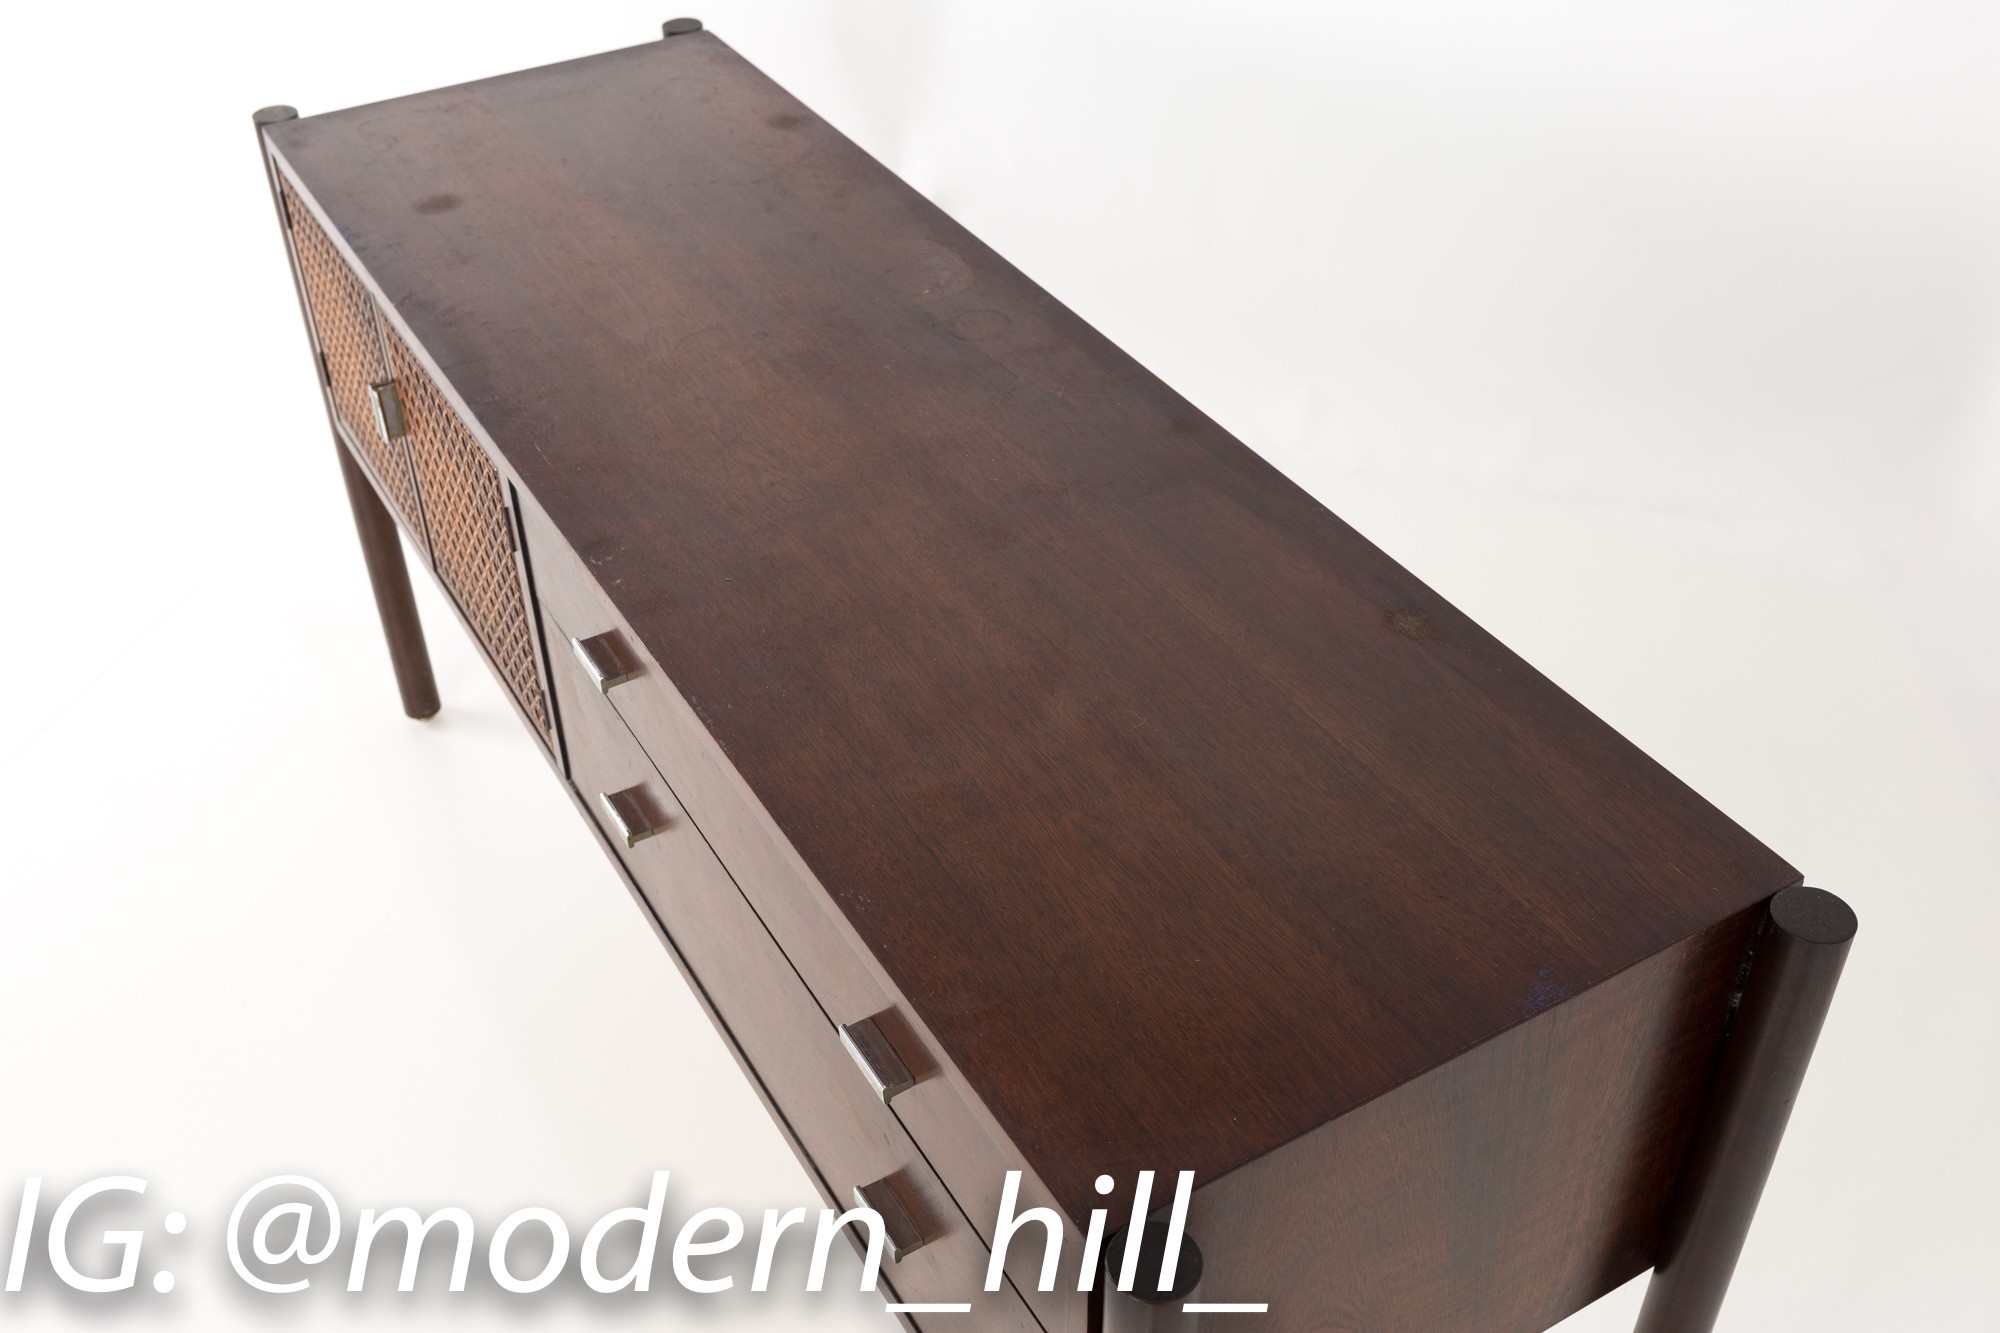 Founders Style Mid Century Walnut and Cane Console Credenza